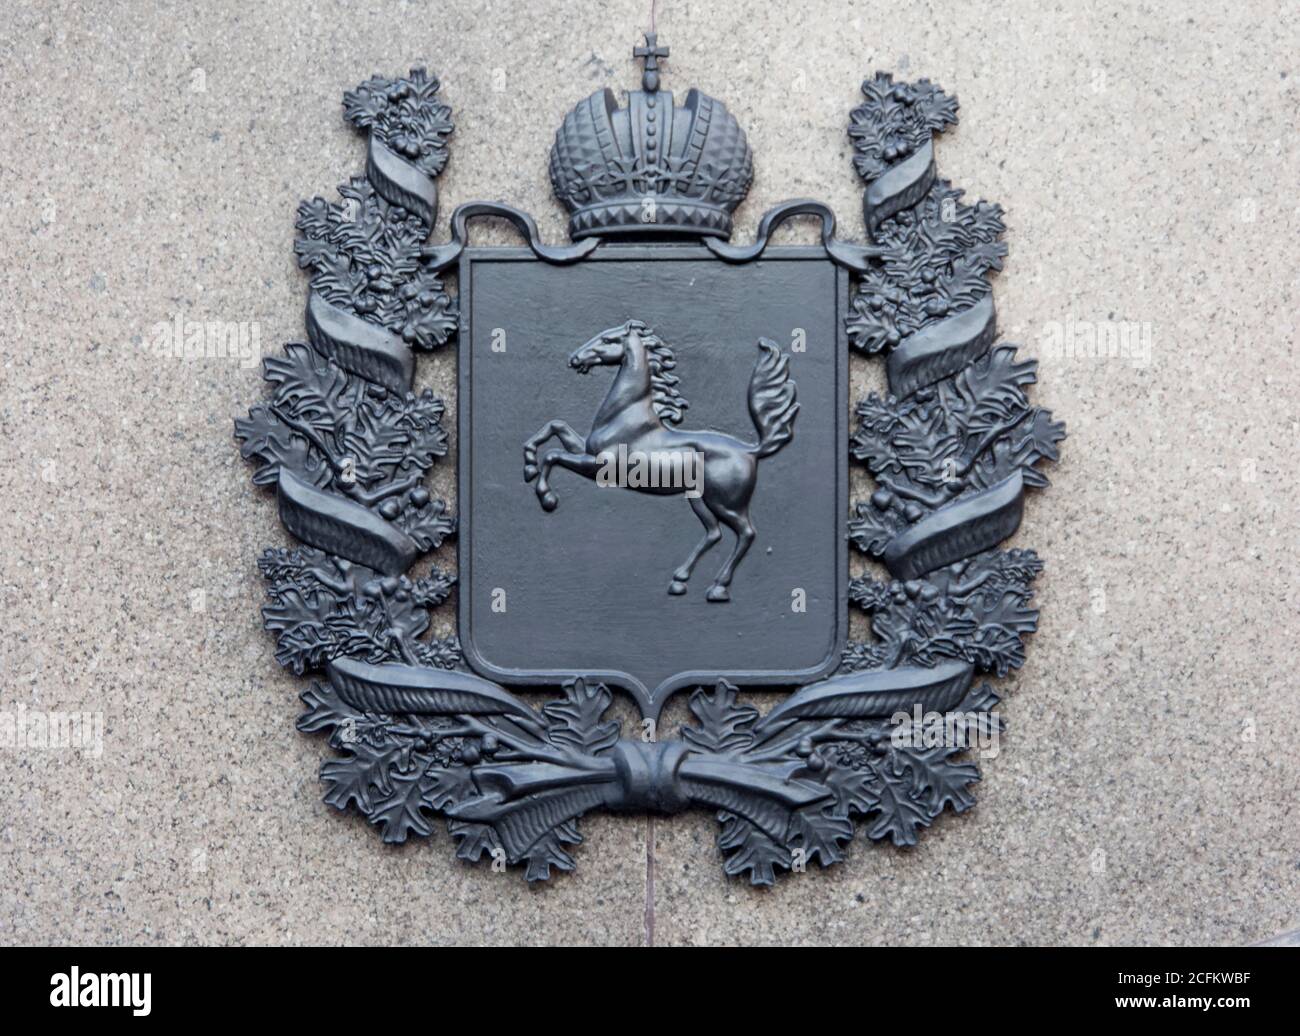 The coat of arms of the city of Tomsk Stock Photo